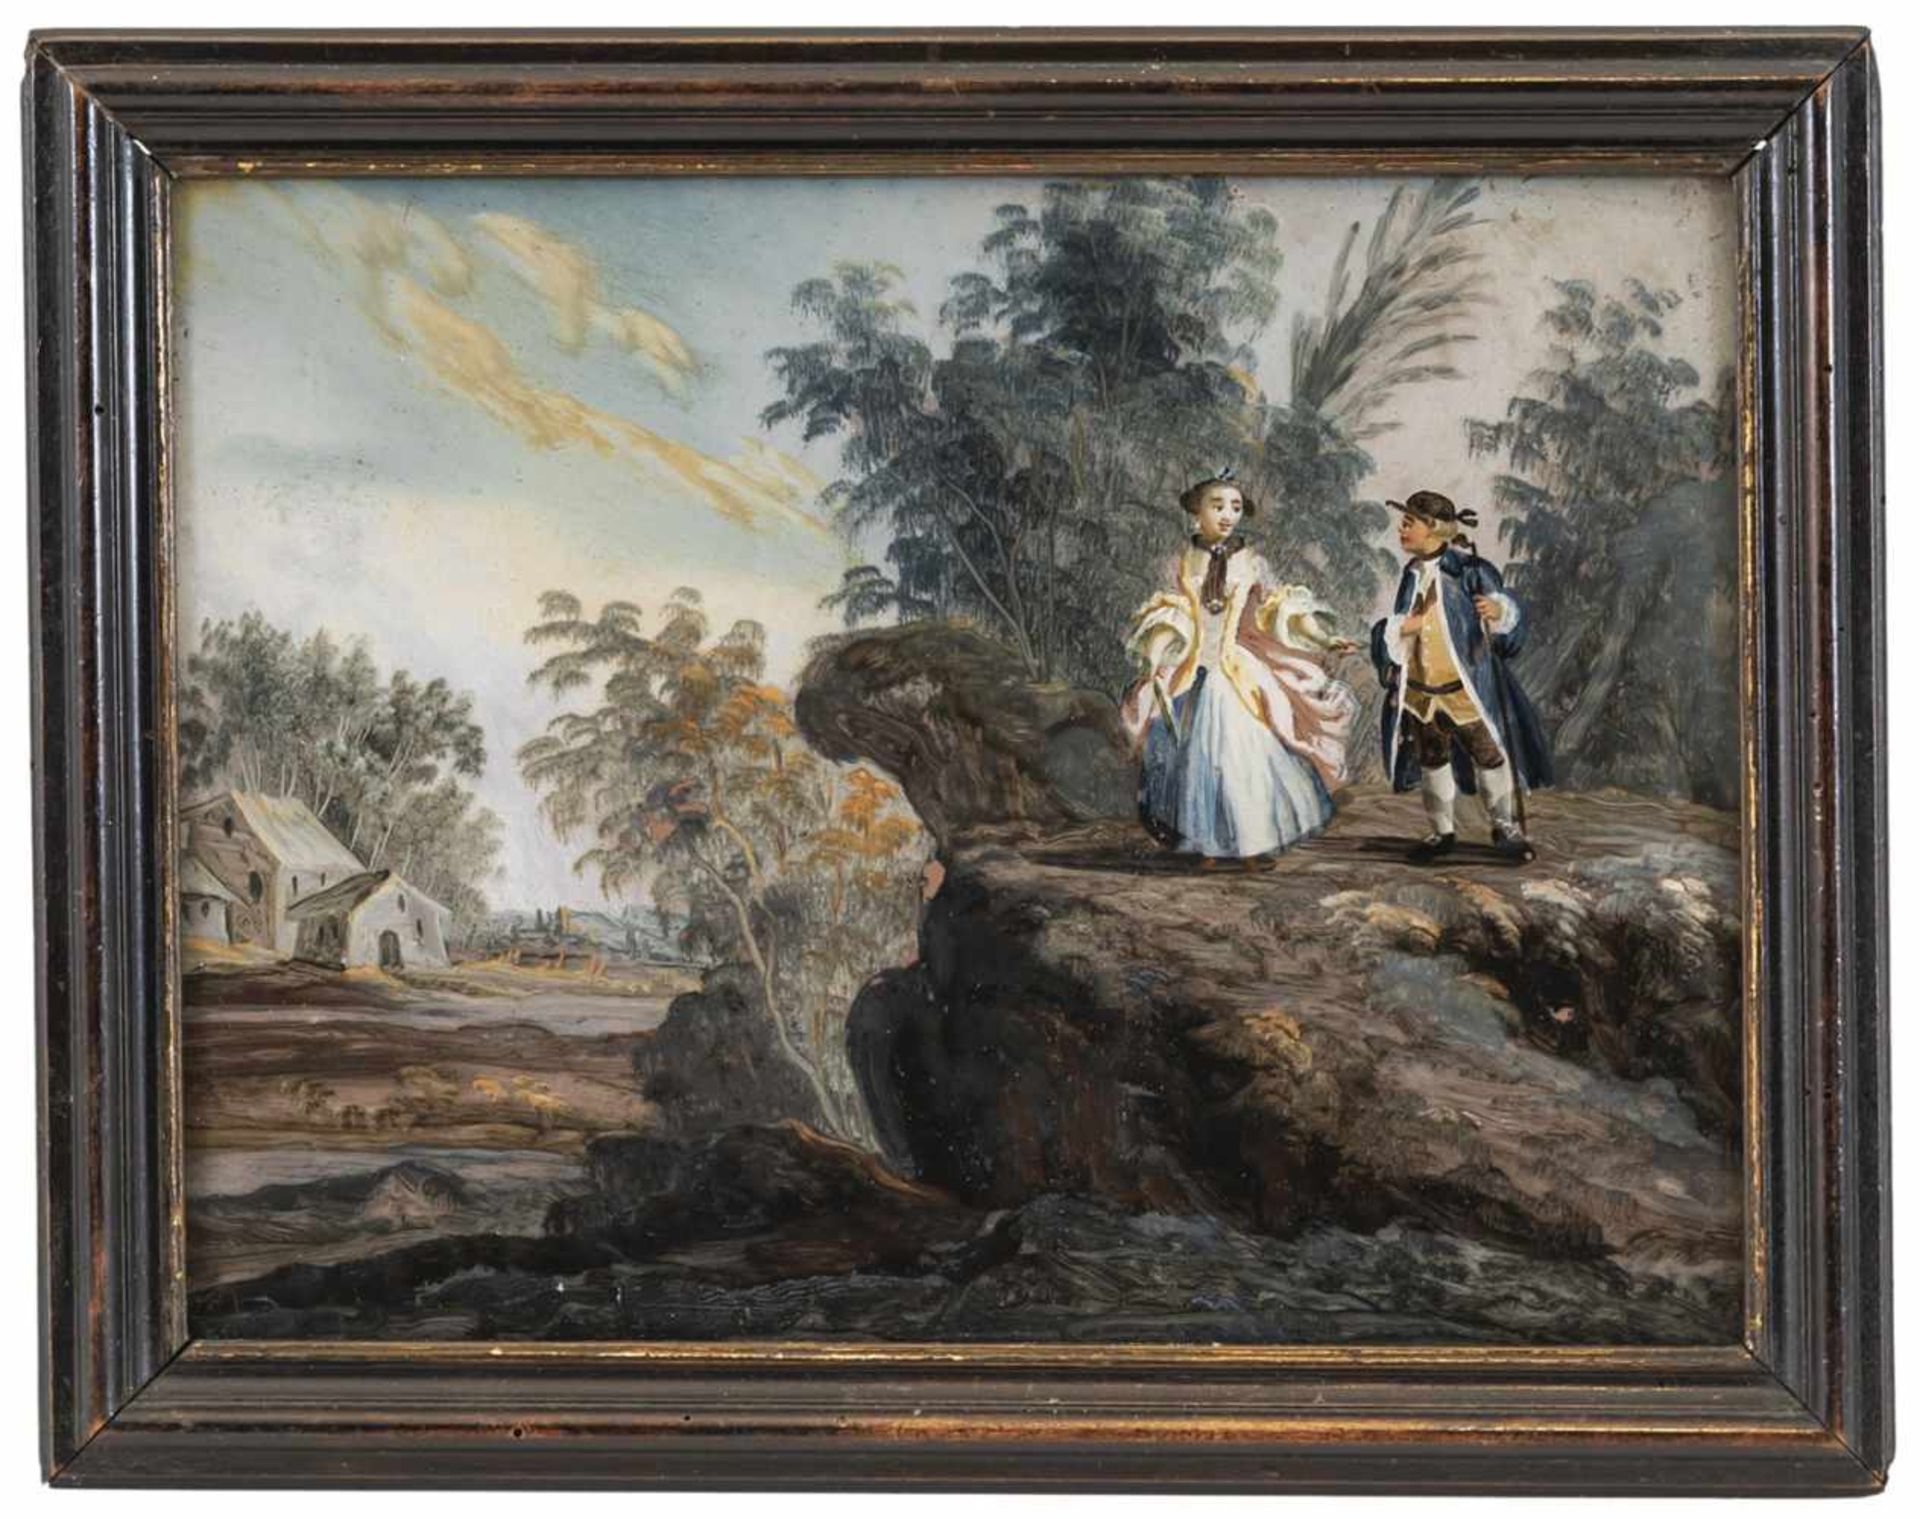 A GLASS PAINTING ON REVERSE, Augsburg, middle of 18th century. A Rococo couple in a river landscape. - Bild 2 aus 2